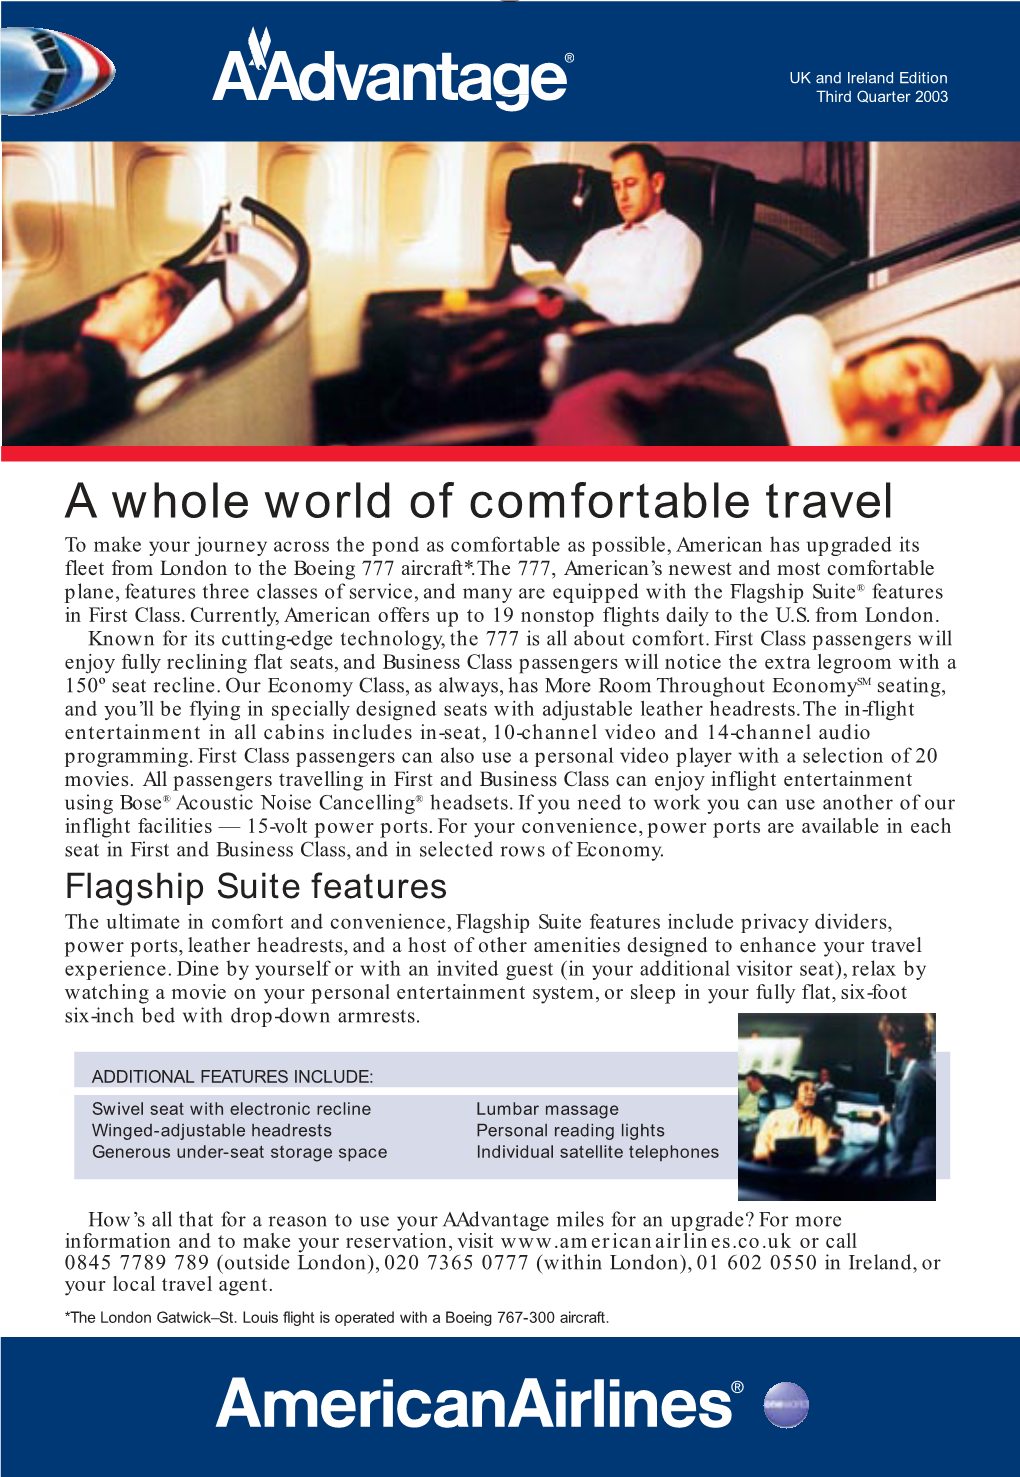 A Whole World of Comfortable Travel